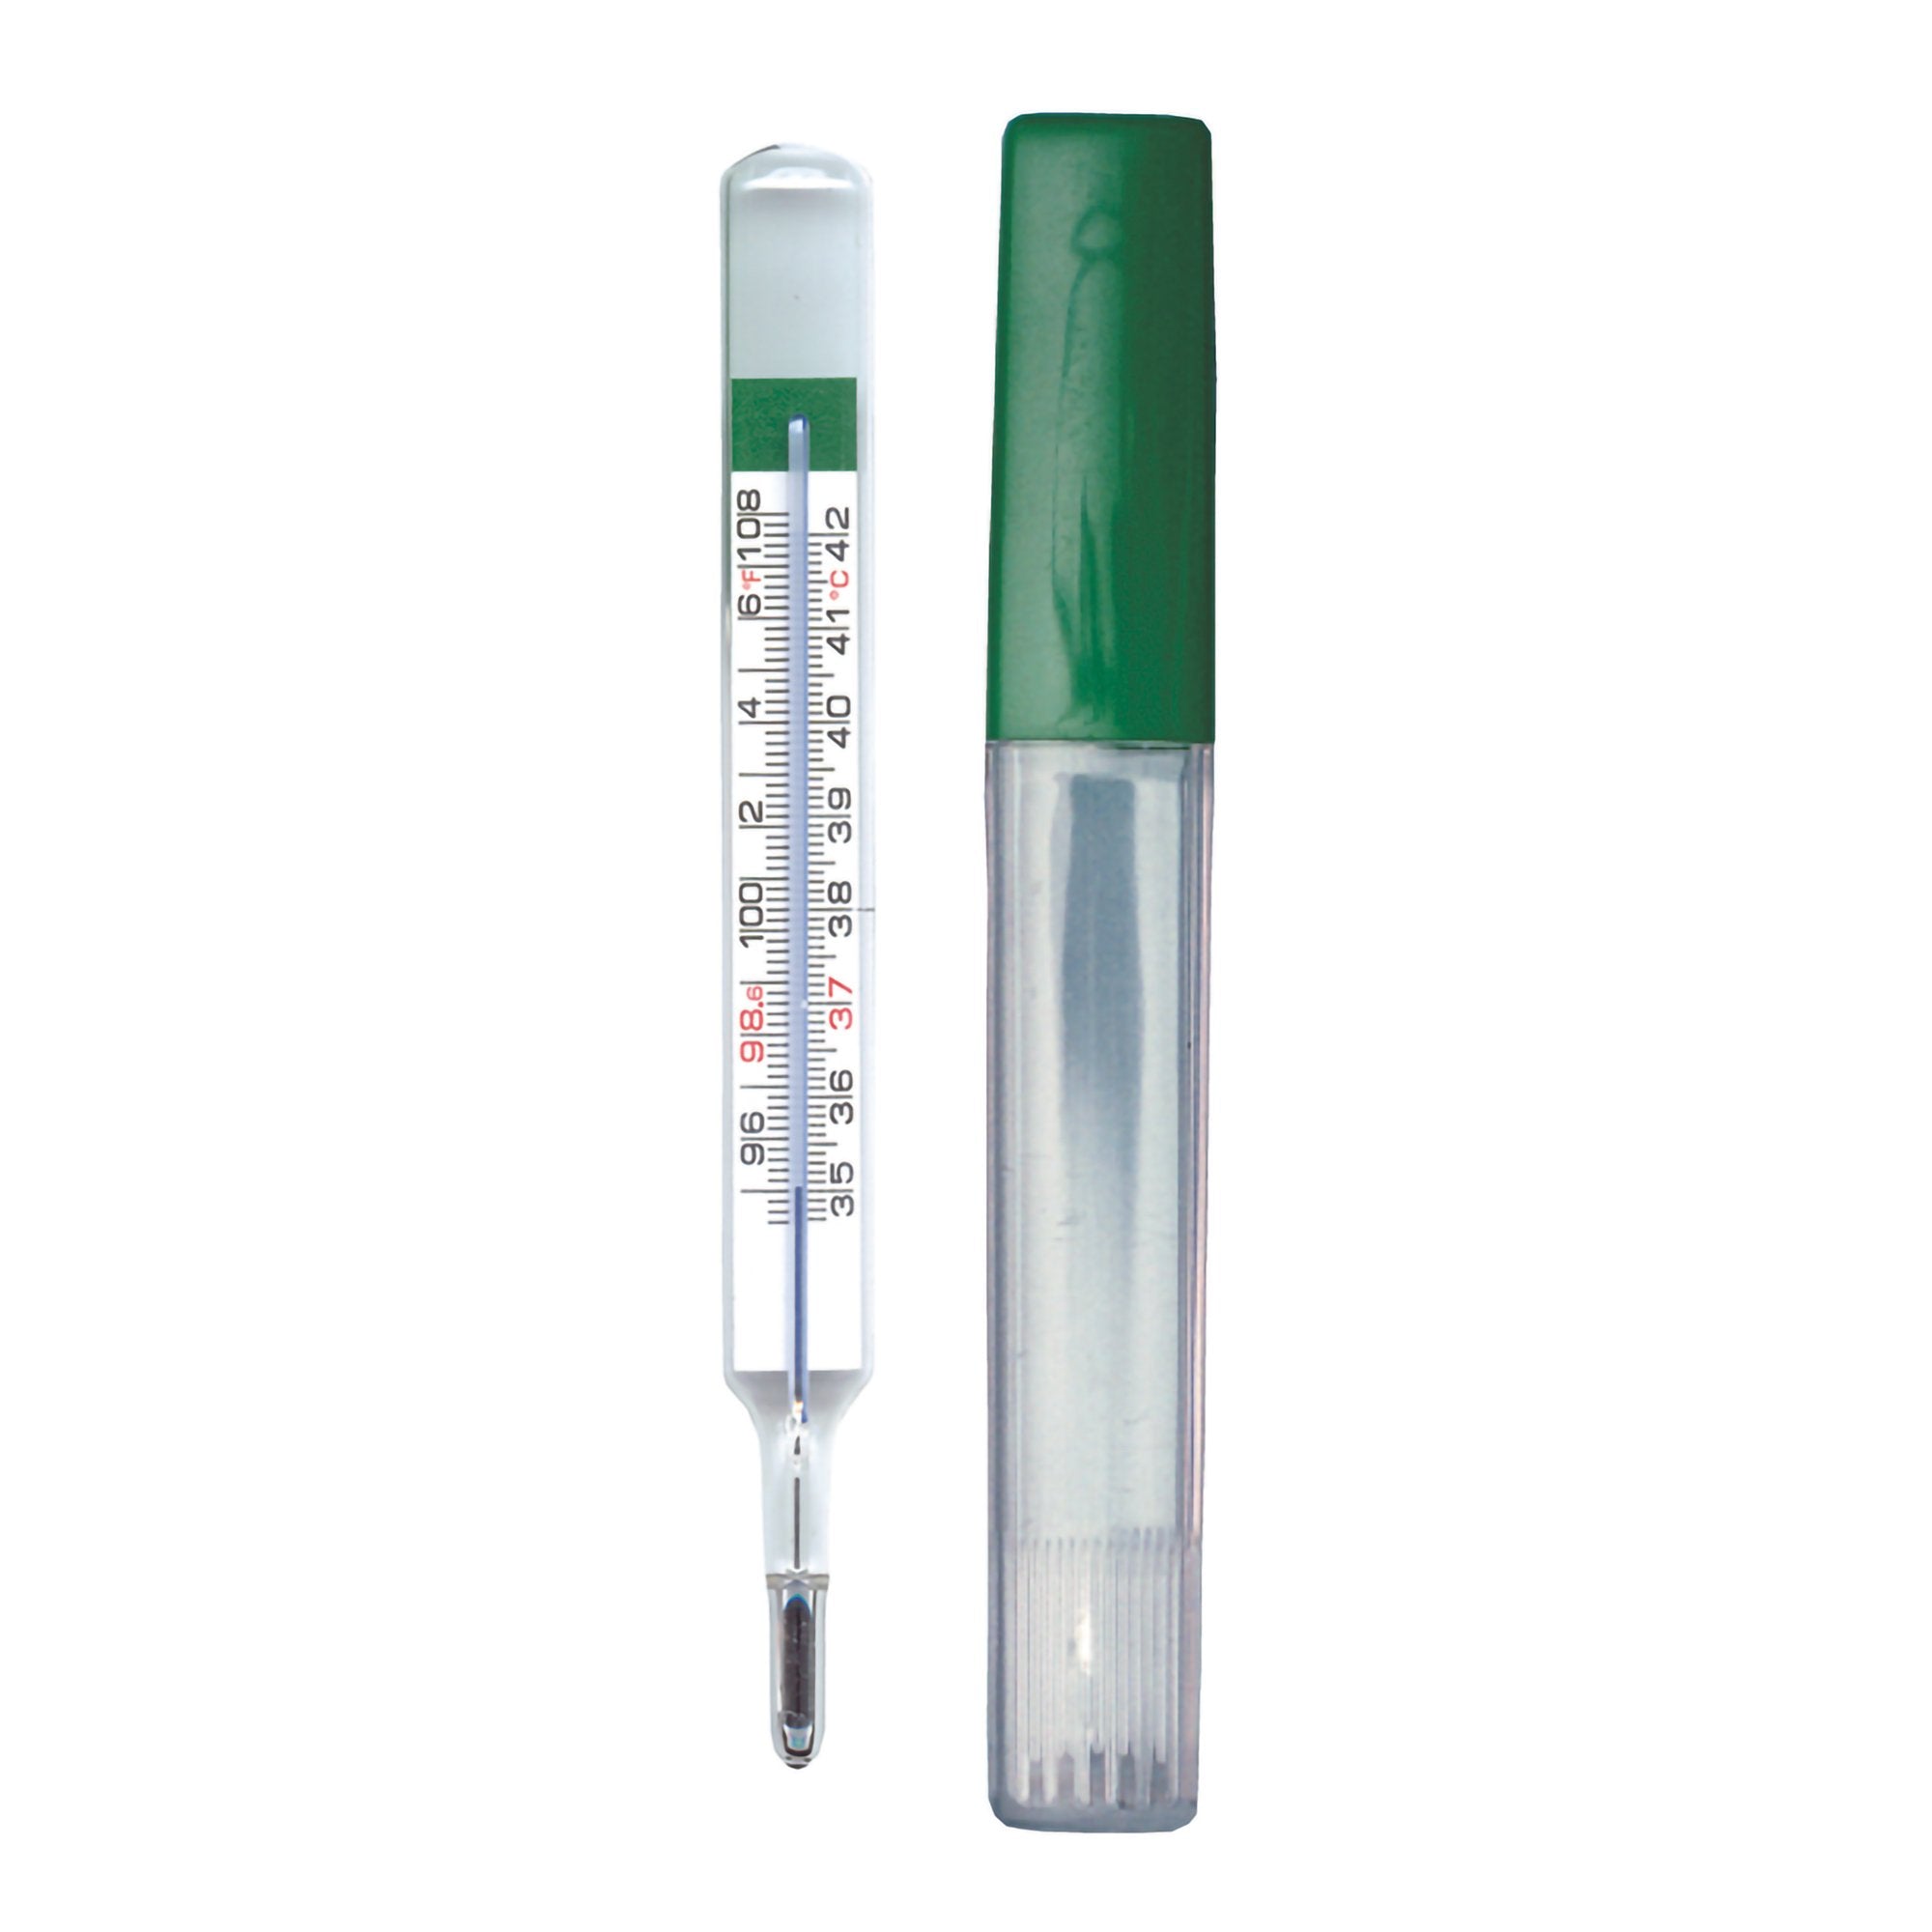 Glass Oral Thermometer Geratherm Glass , Mercury Free Oval Shape Fahrenheit / Celsius